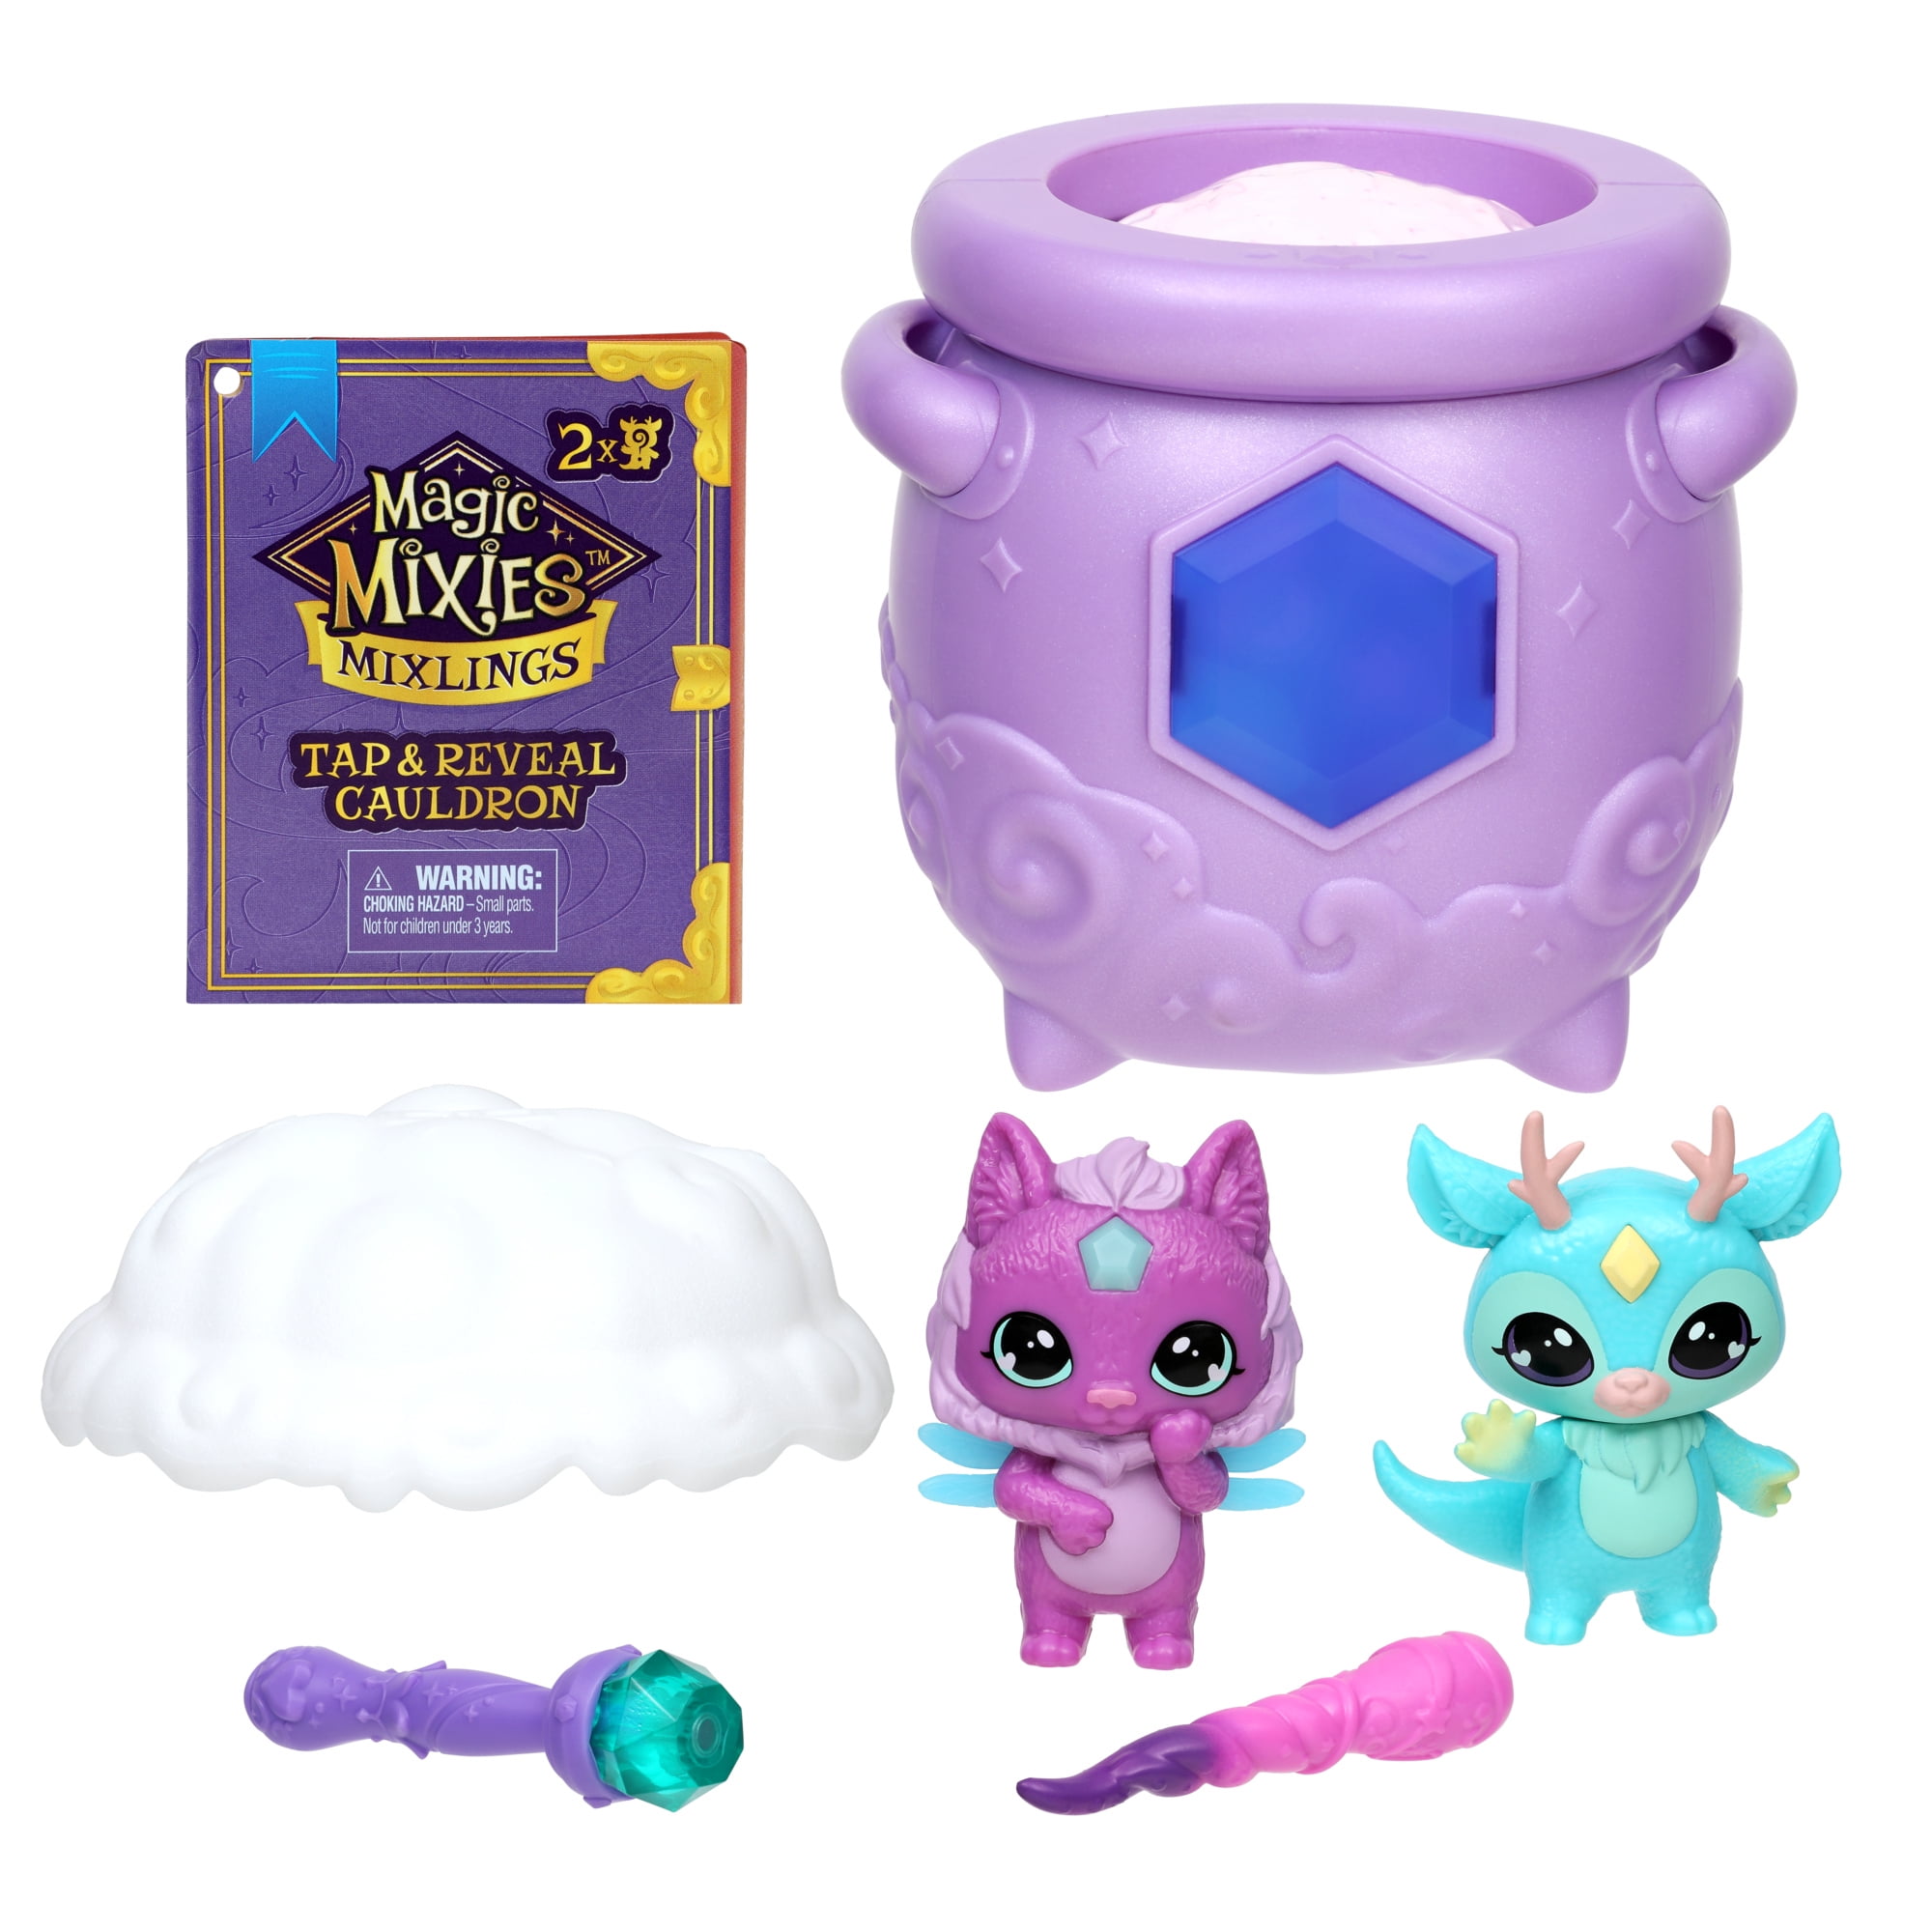 2000px x 2000px - Magic Mixies Mixlings Tap & Reveal Cauldron 2 Pack, Magic Wand Reveals Magic  Power and Surprise Reveal on Cauldron, Colors and Styles May Vary, Toys for  Kids Aged 5 and Up - Walmart.com